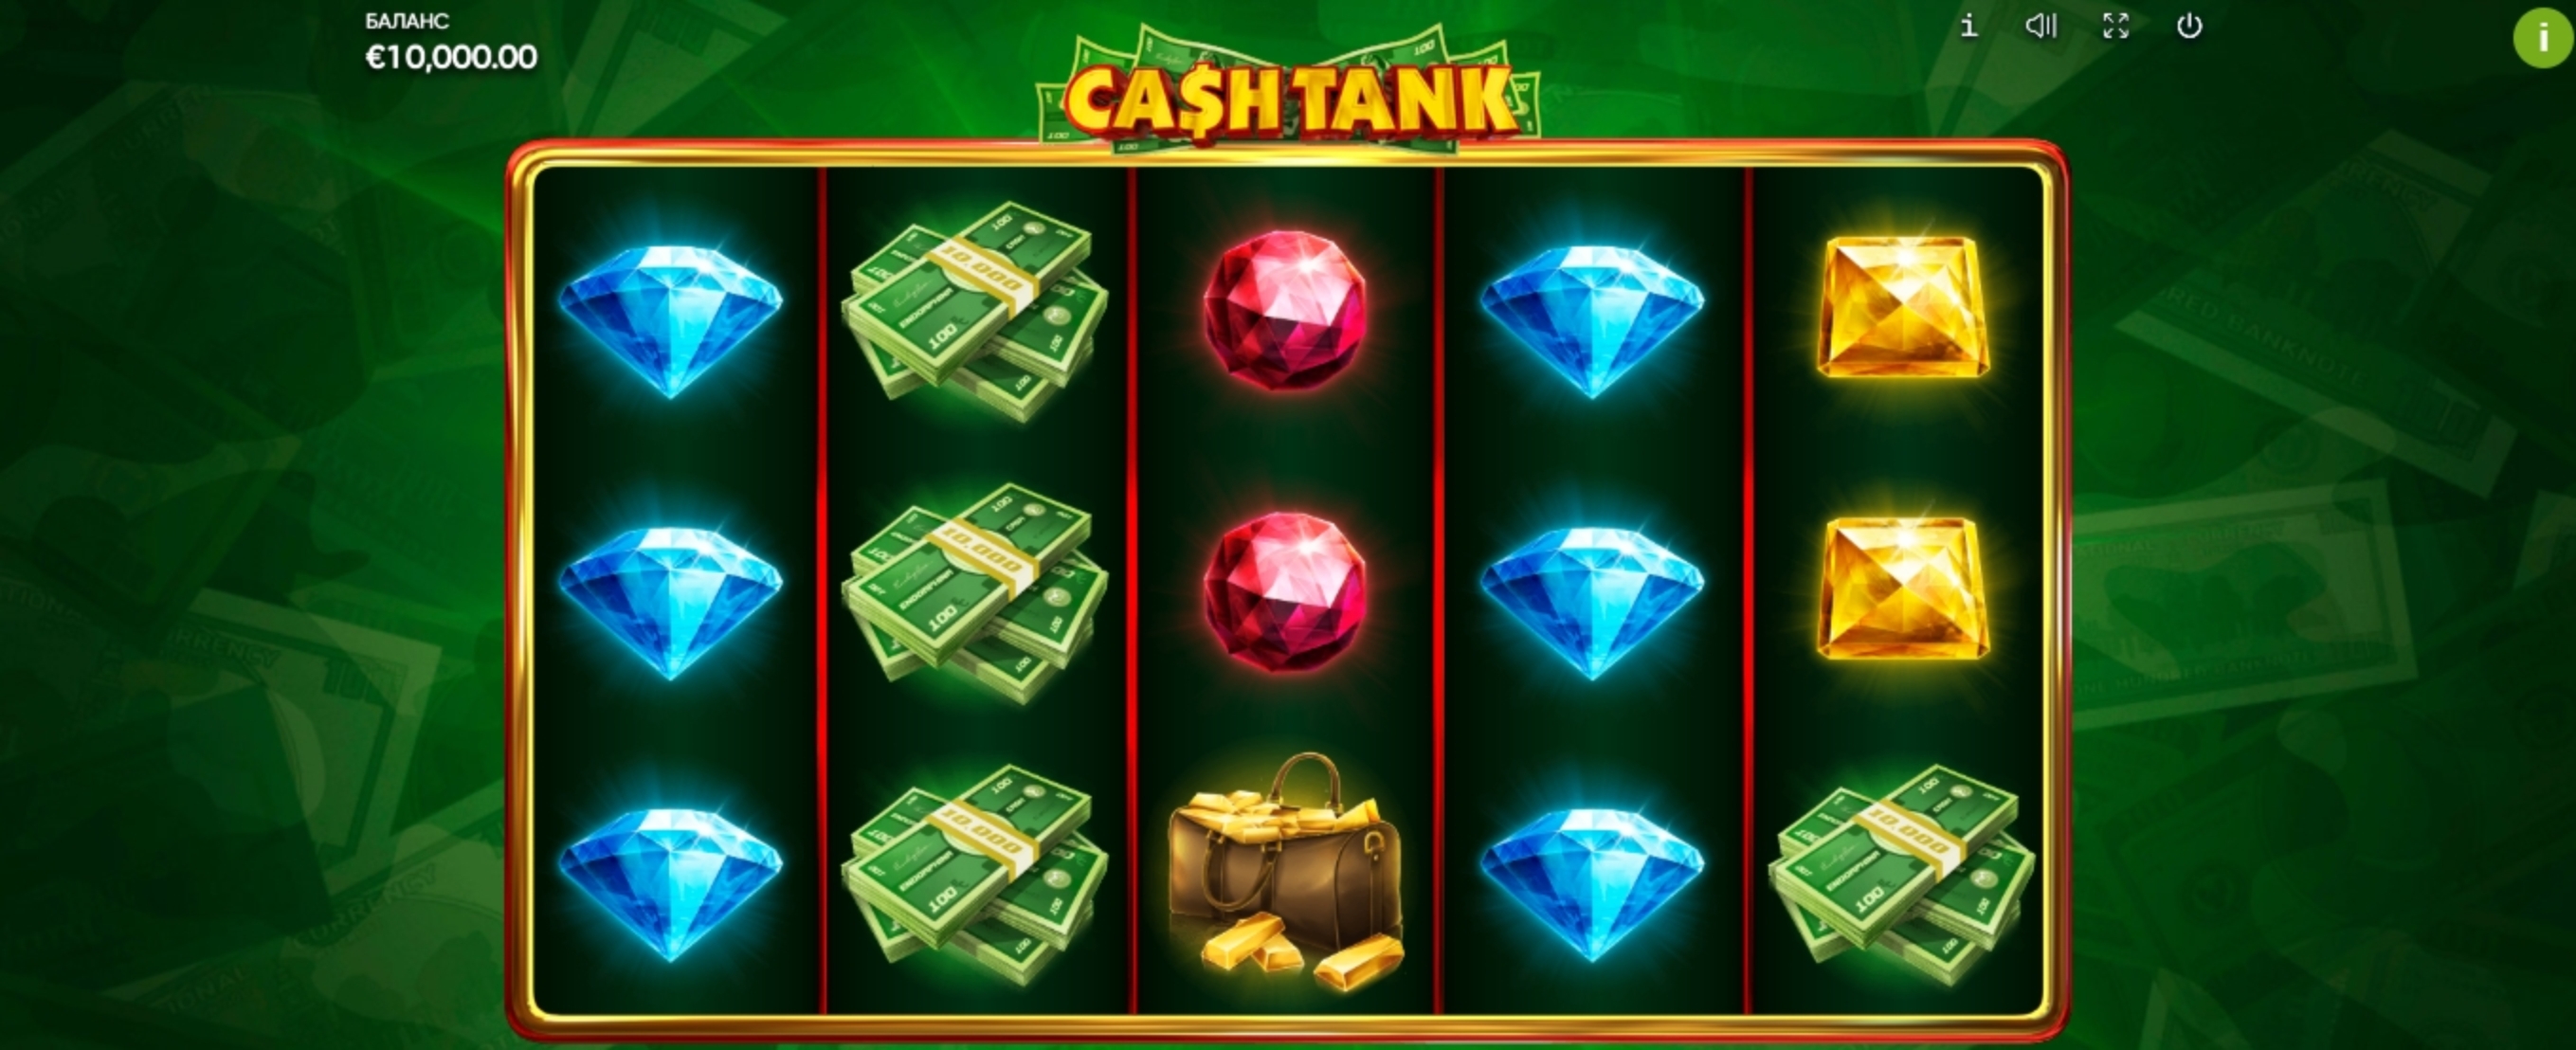 Reels in Cash Tank Slot Game by Endorphina